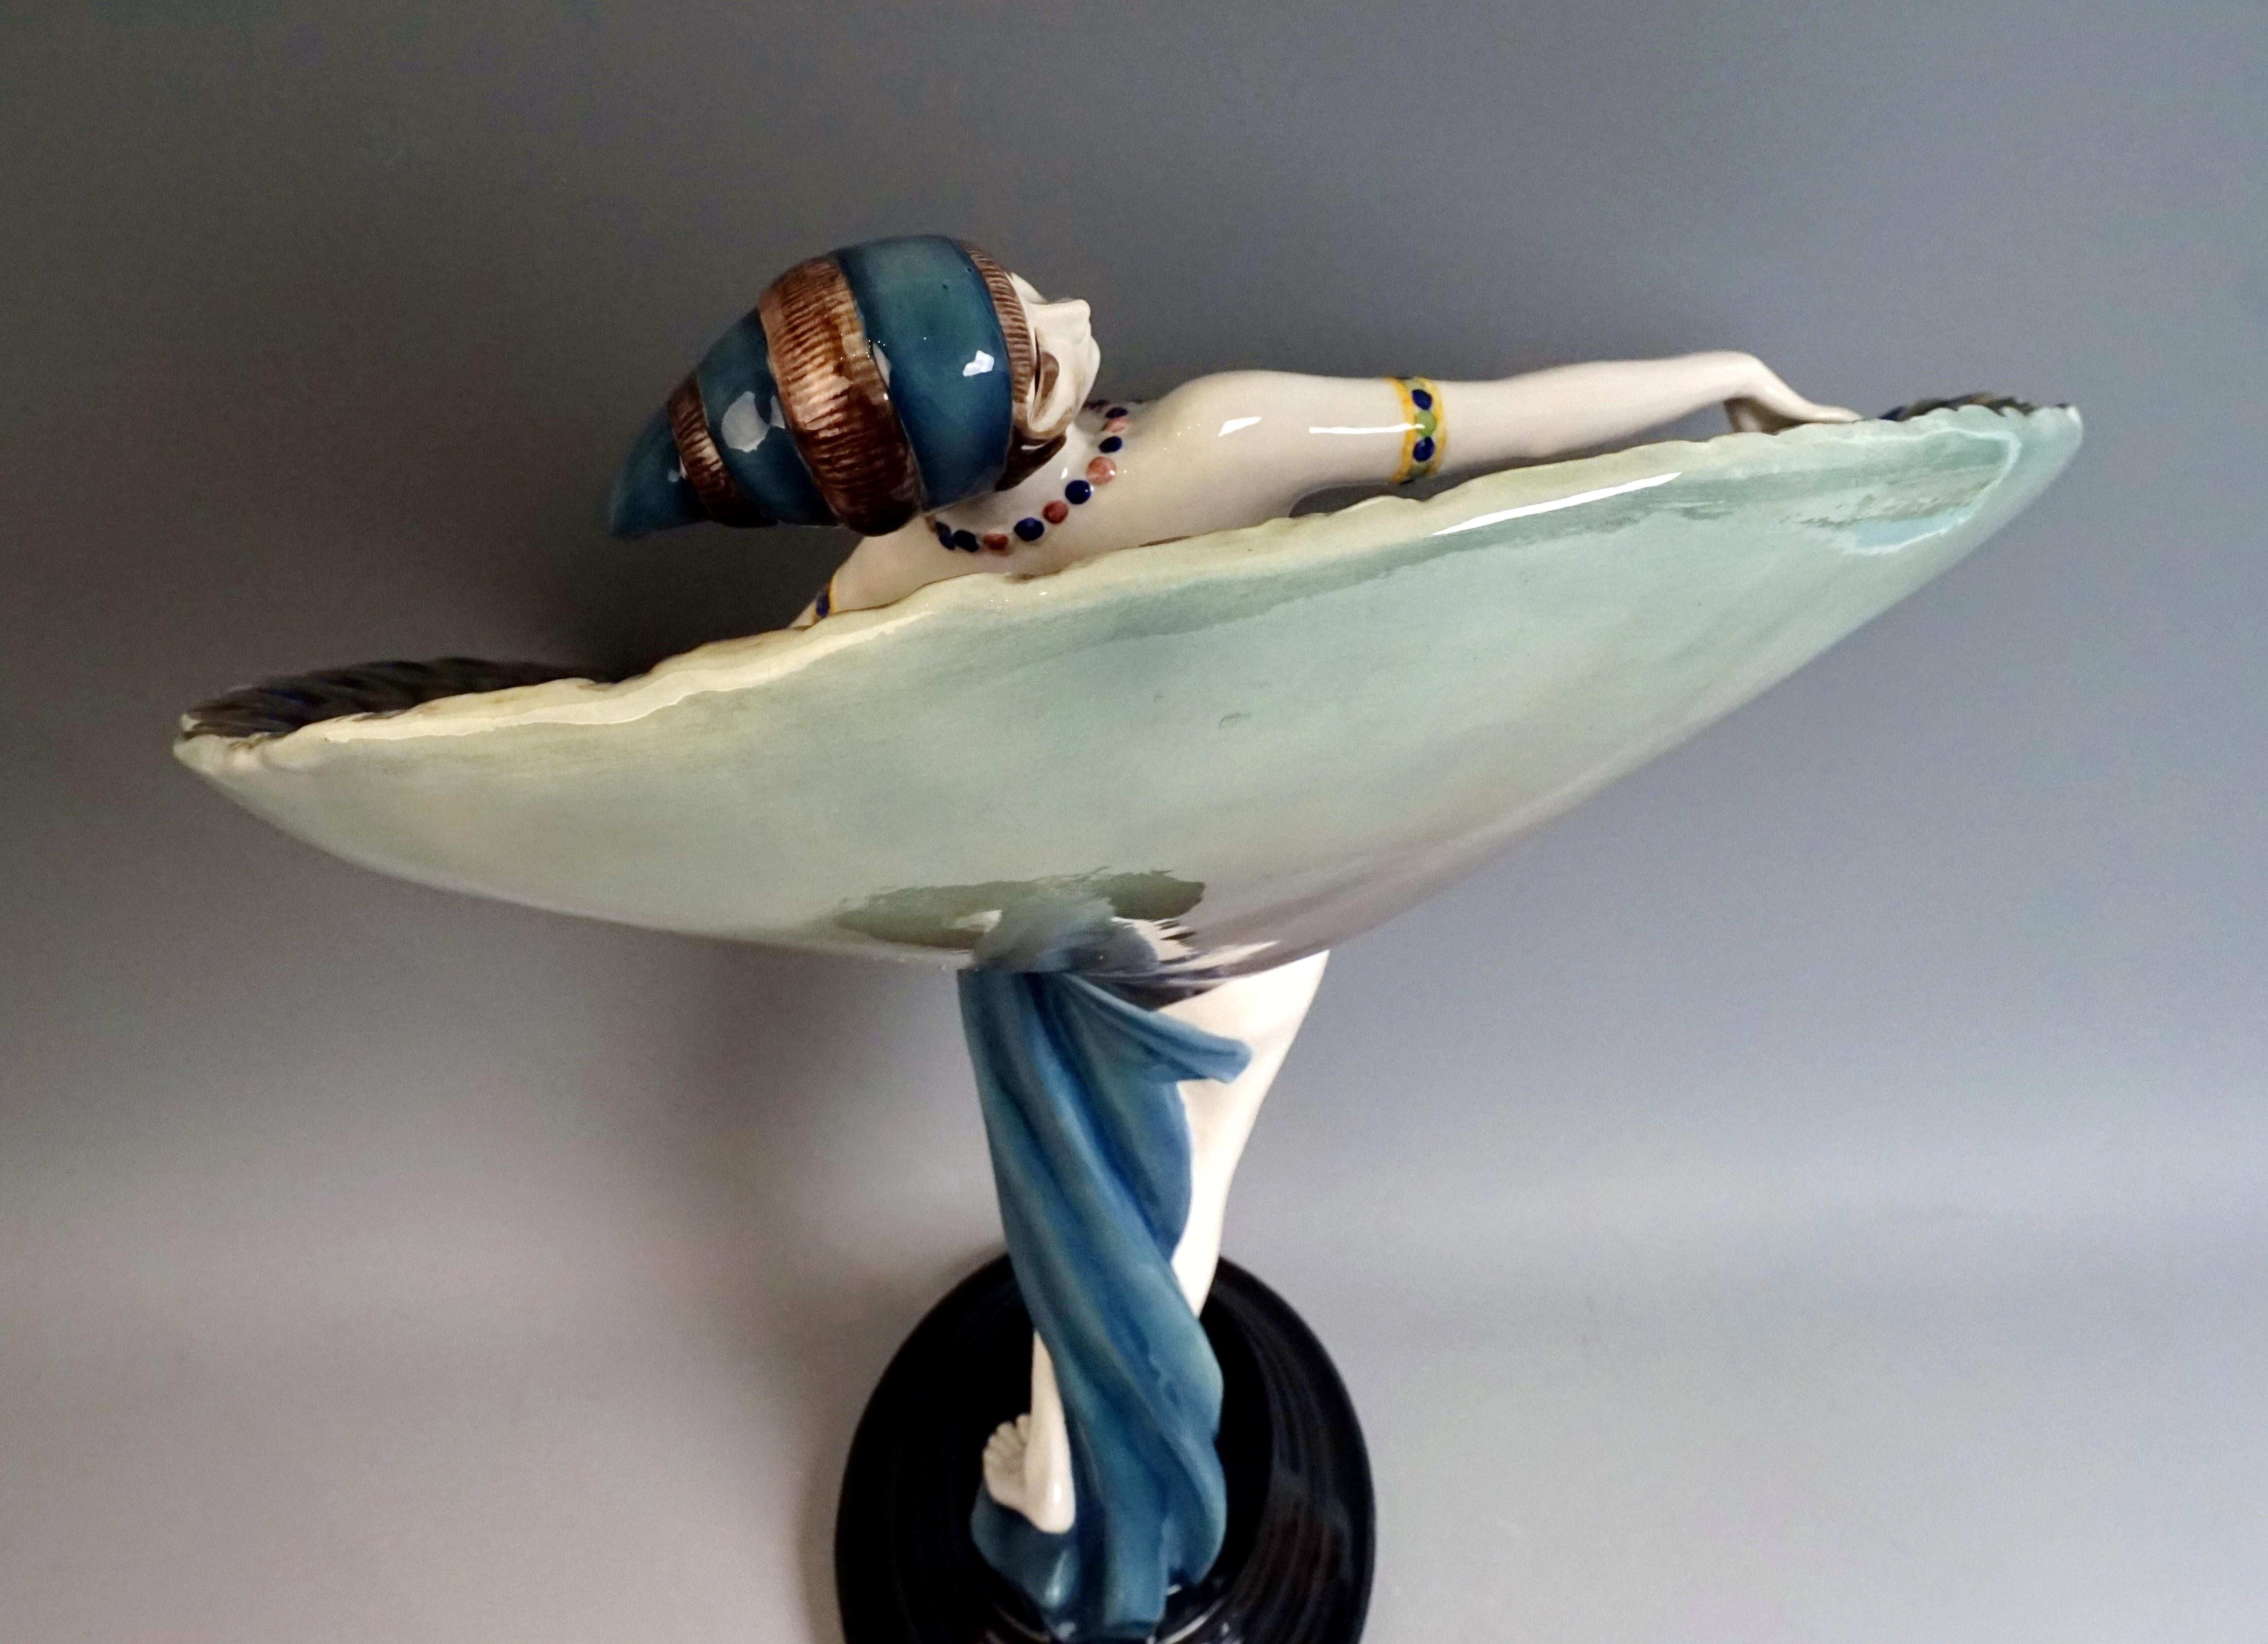 Early 20th Century Goldscheider Art Deco Figure 'Lady Dancer in Peacock Costume' by Paul Philippe